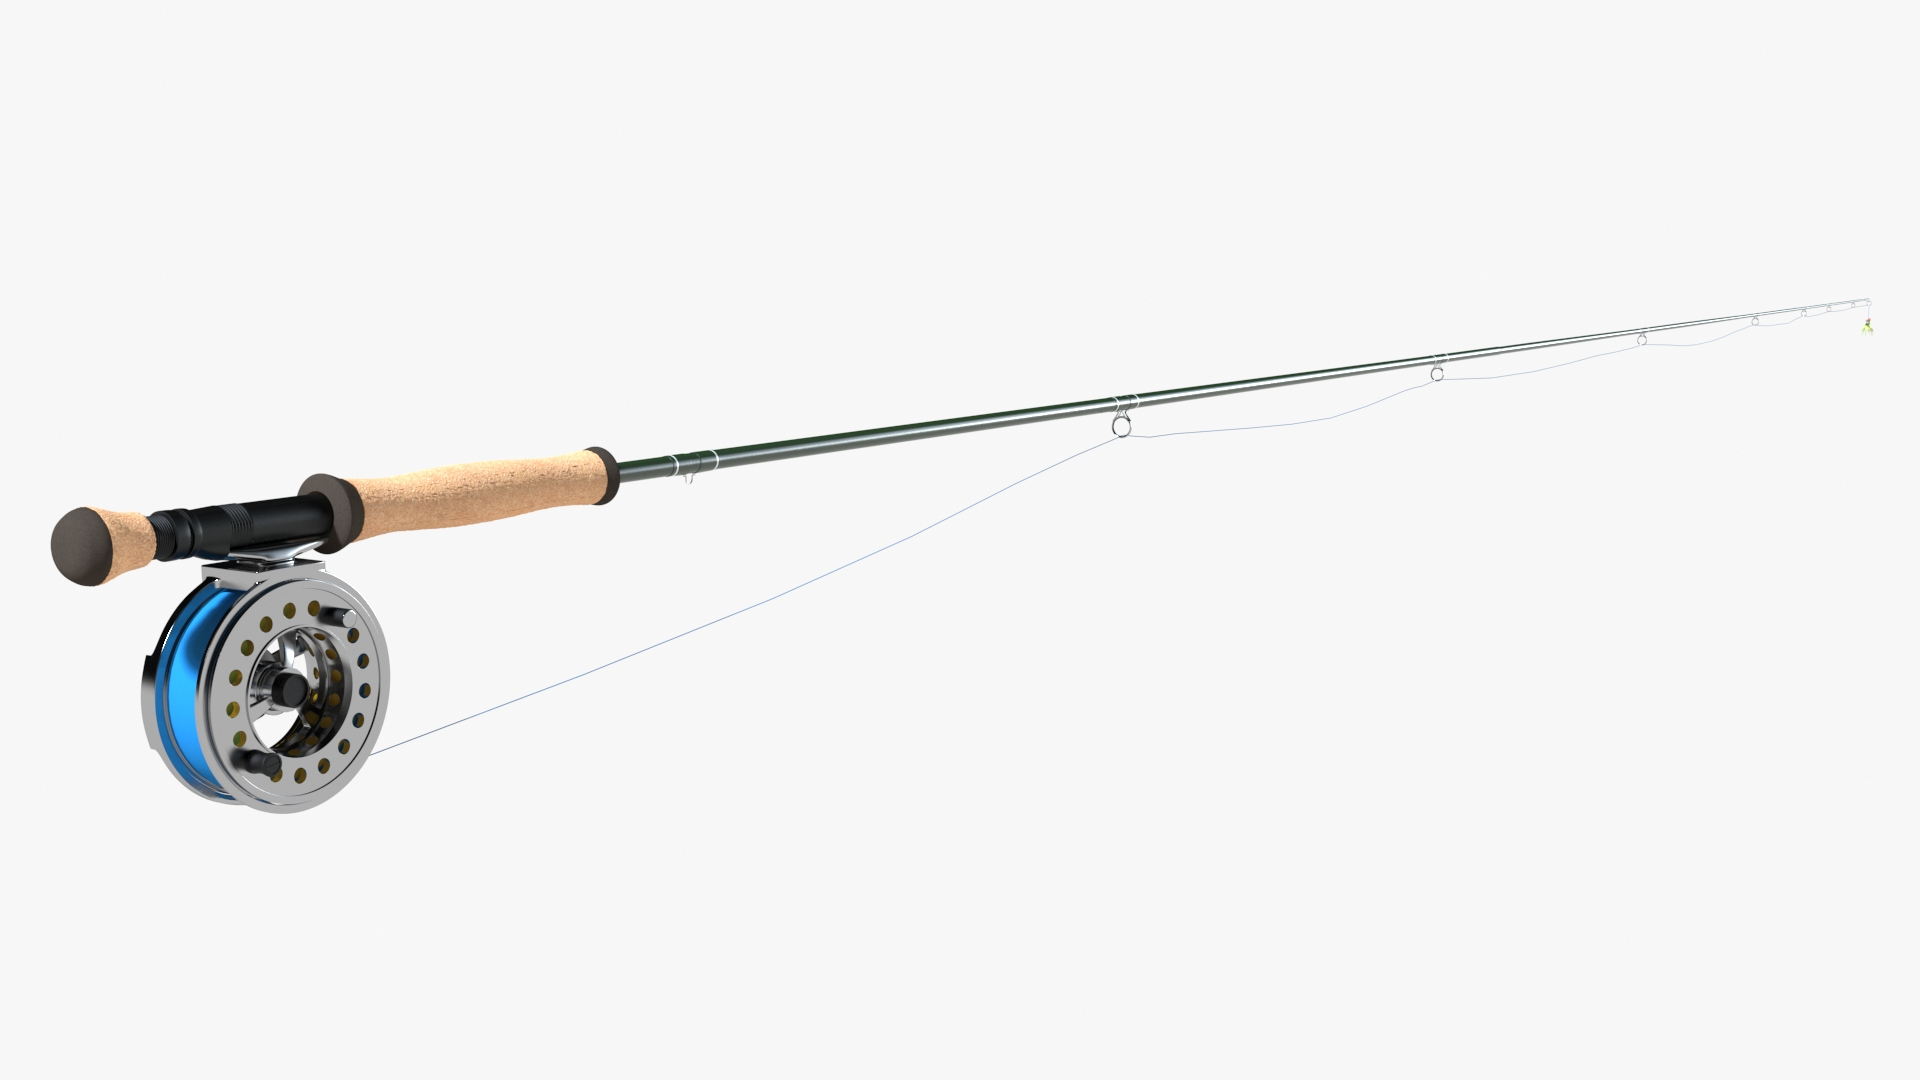 Fly Rod And Reel Model - TurboSquid 1784423